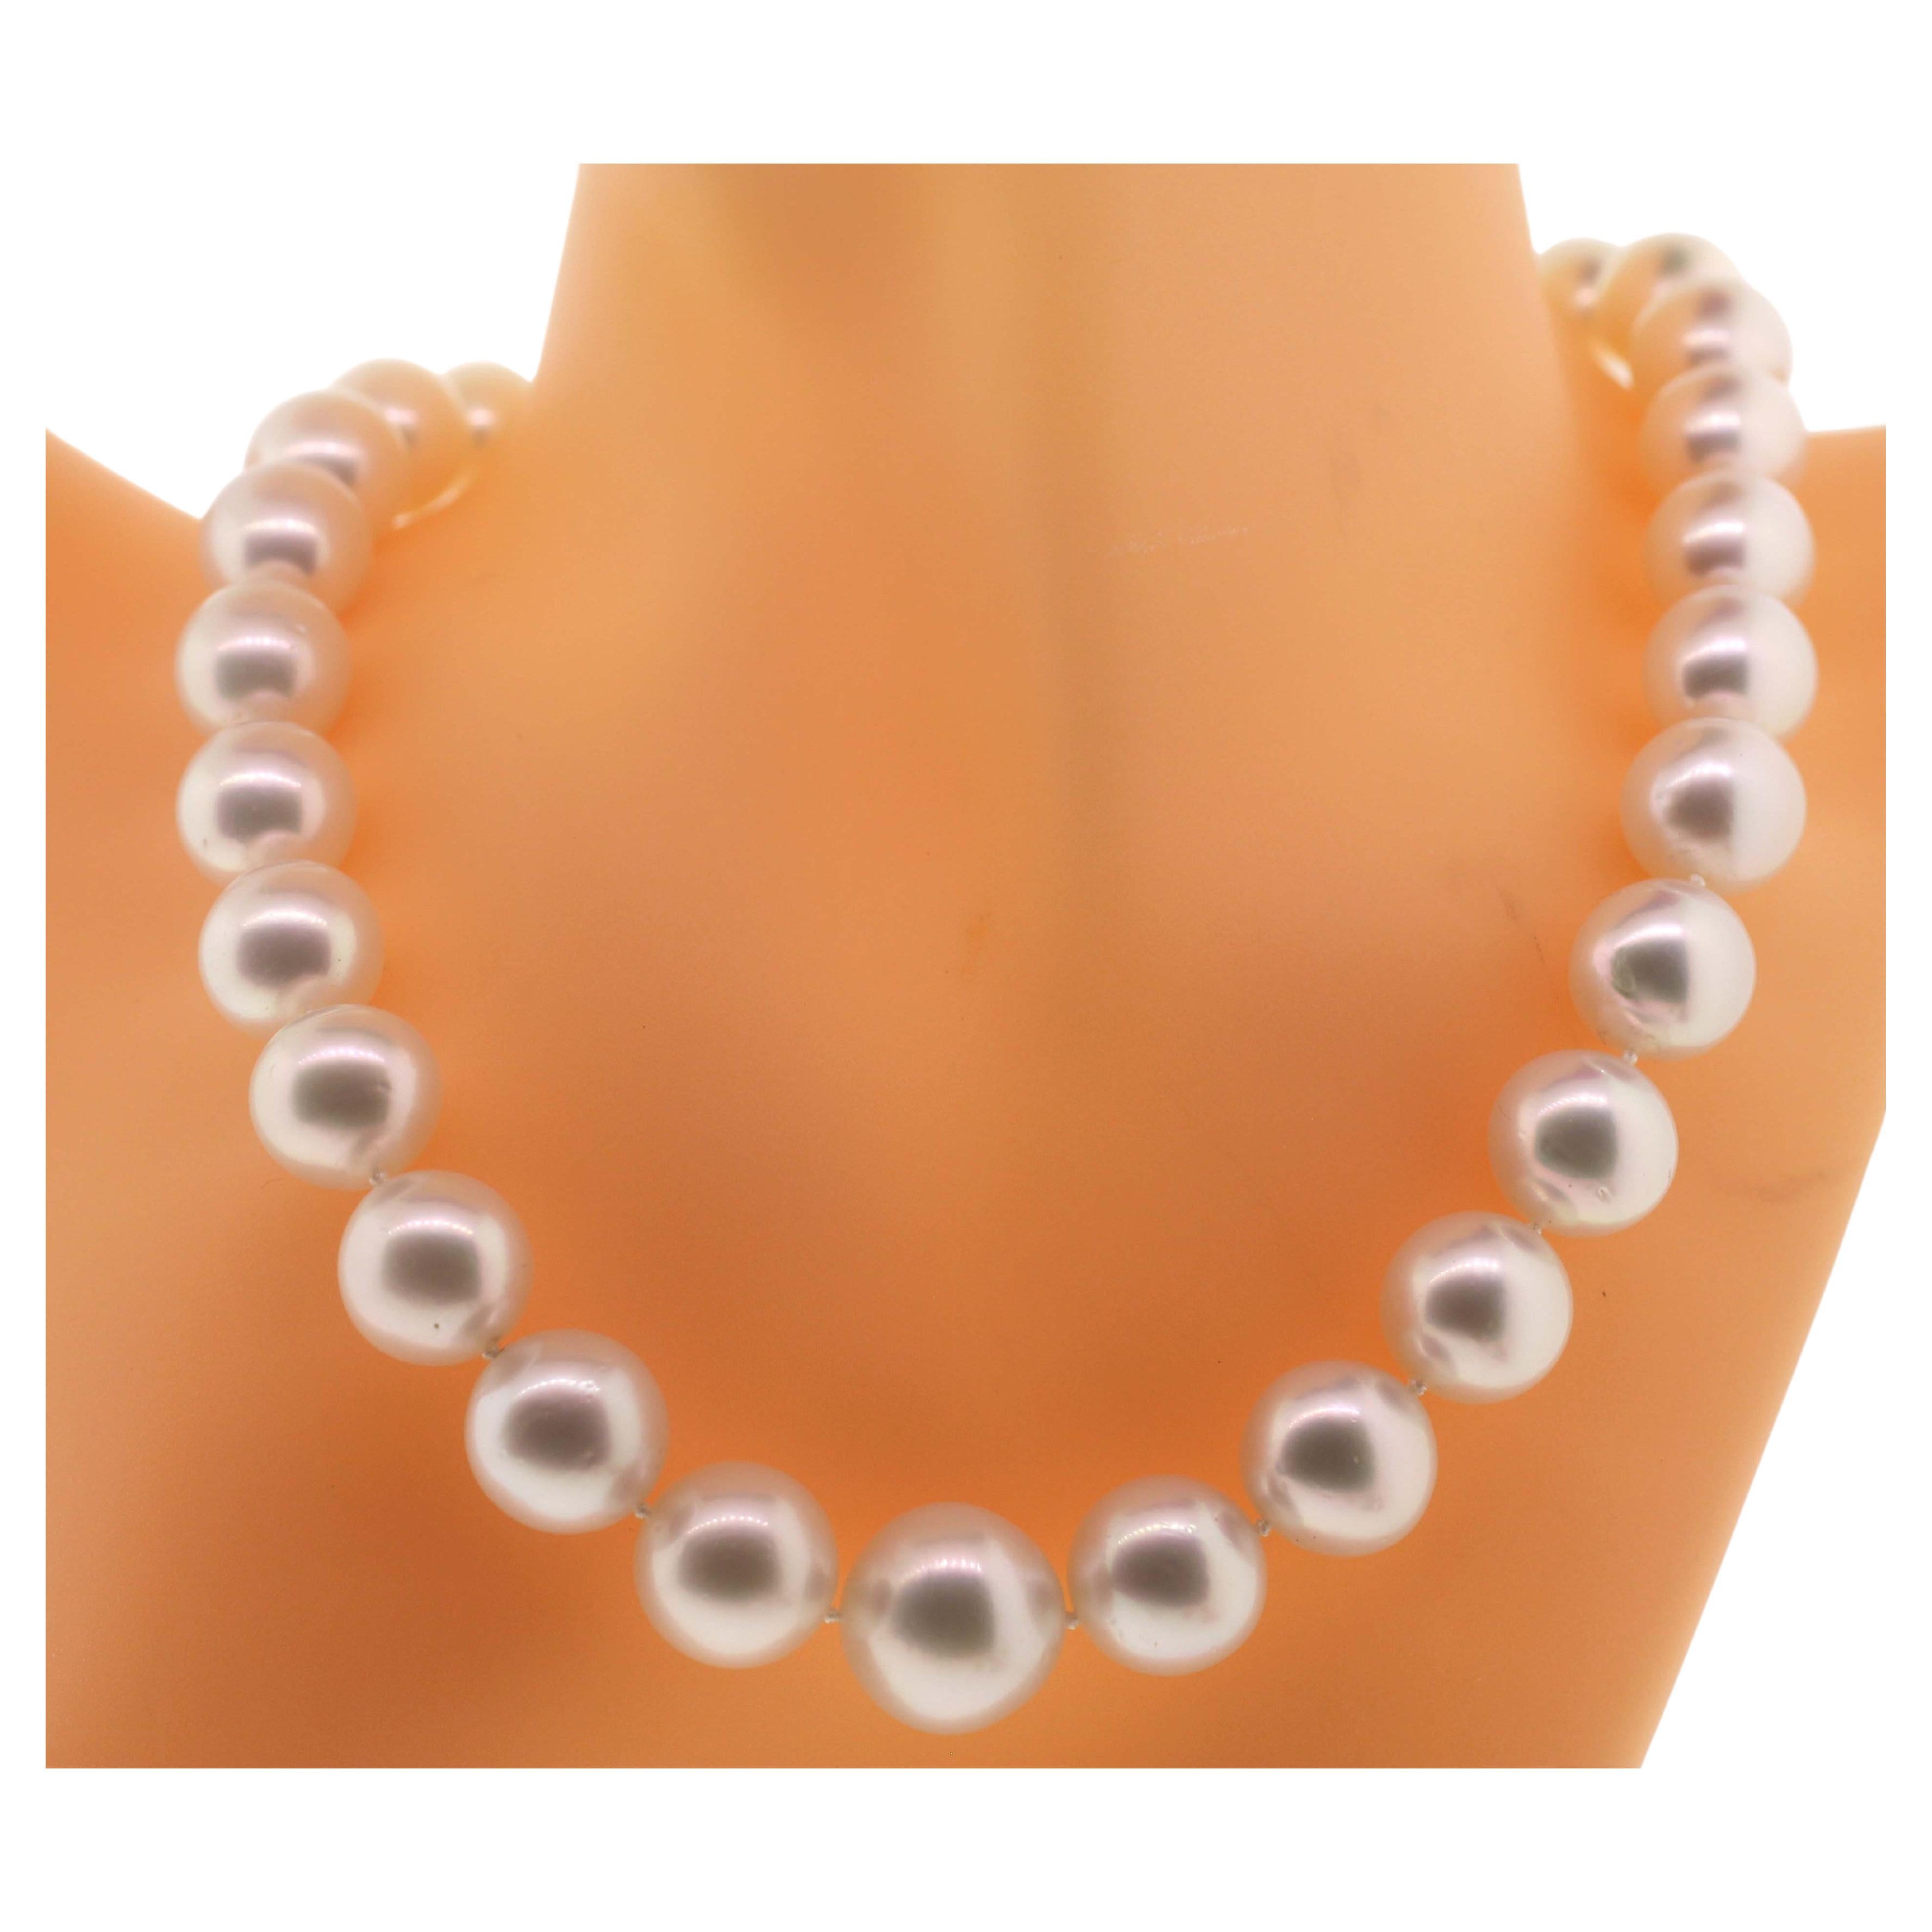 Hakimoto By Jewel Of Ocean 18K South Sea Strand Necklace
18K White Gold  With 0.2 Carts Of Diamonds
Weight (g): 99
Cultured South Sea Pearl 
Pearl Size: 15x12.4 mm 
Body color: White 
Orient: Very Good
Luster: Very Good 
Surface:  Eye Clean Face